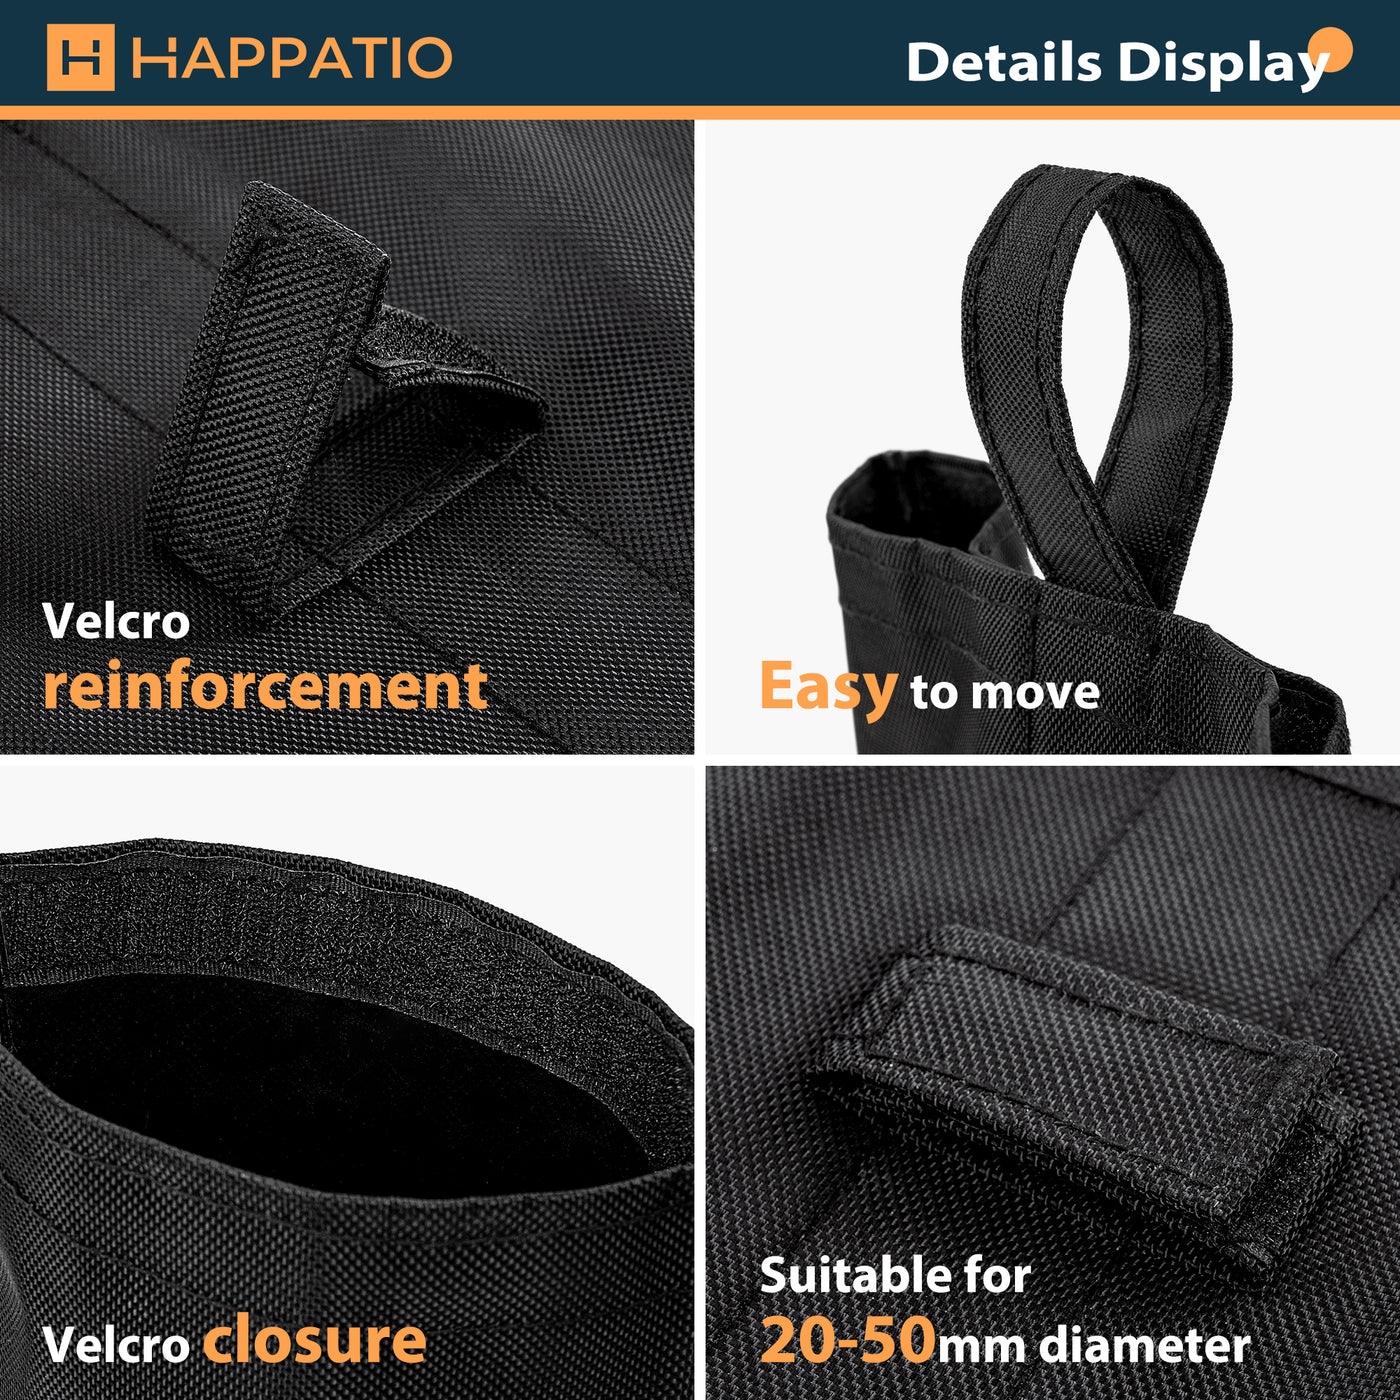 HAPPATIO Canopy Weights Set of 4 (Without Sands) , 1680D Sand Bags for Pop Up Canopy Tent, Gazebo, Patio Umbrellas, Sandbags for Weight